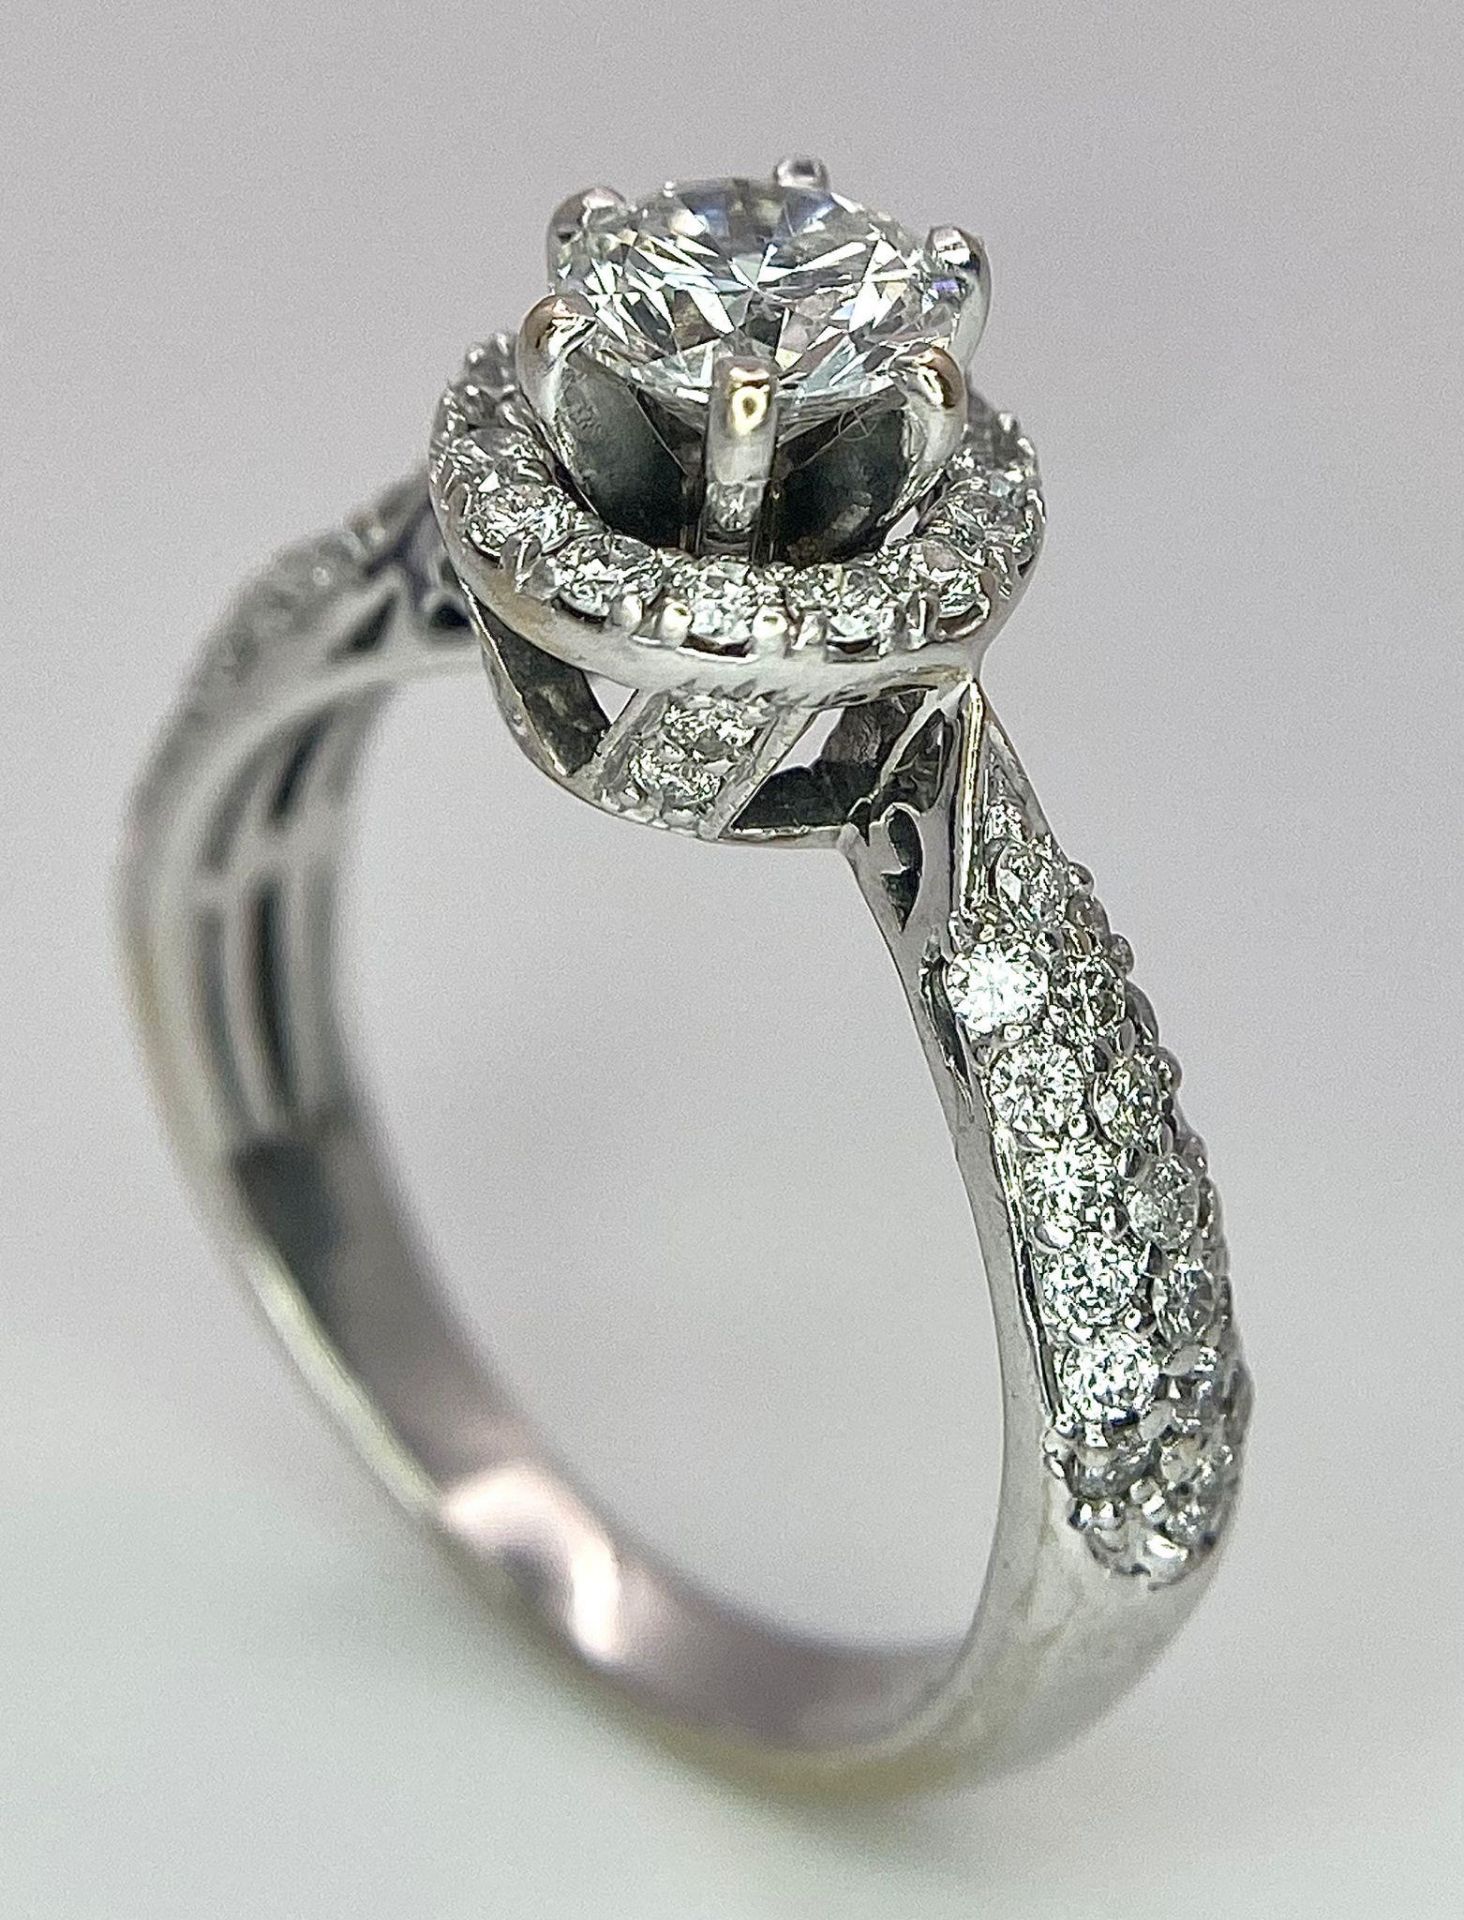 An 18K White Gold Diamond Ring. Central 0.75ct brilliant round cut diamond with a diamond halo and - Image 4 of 10